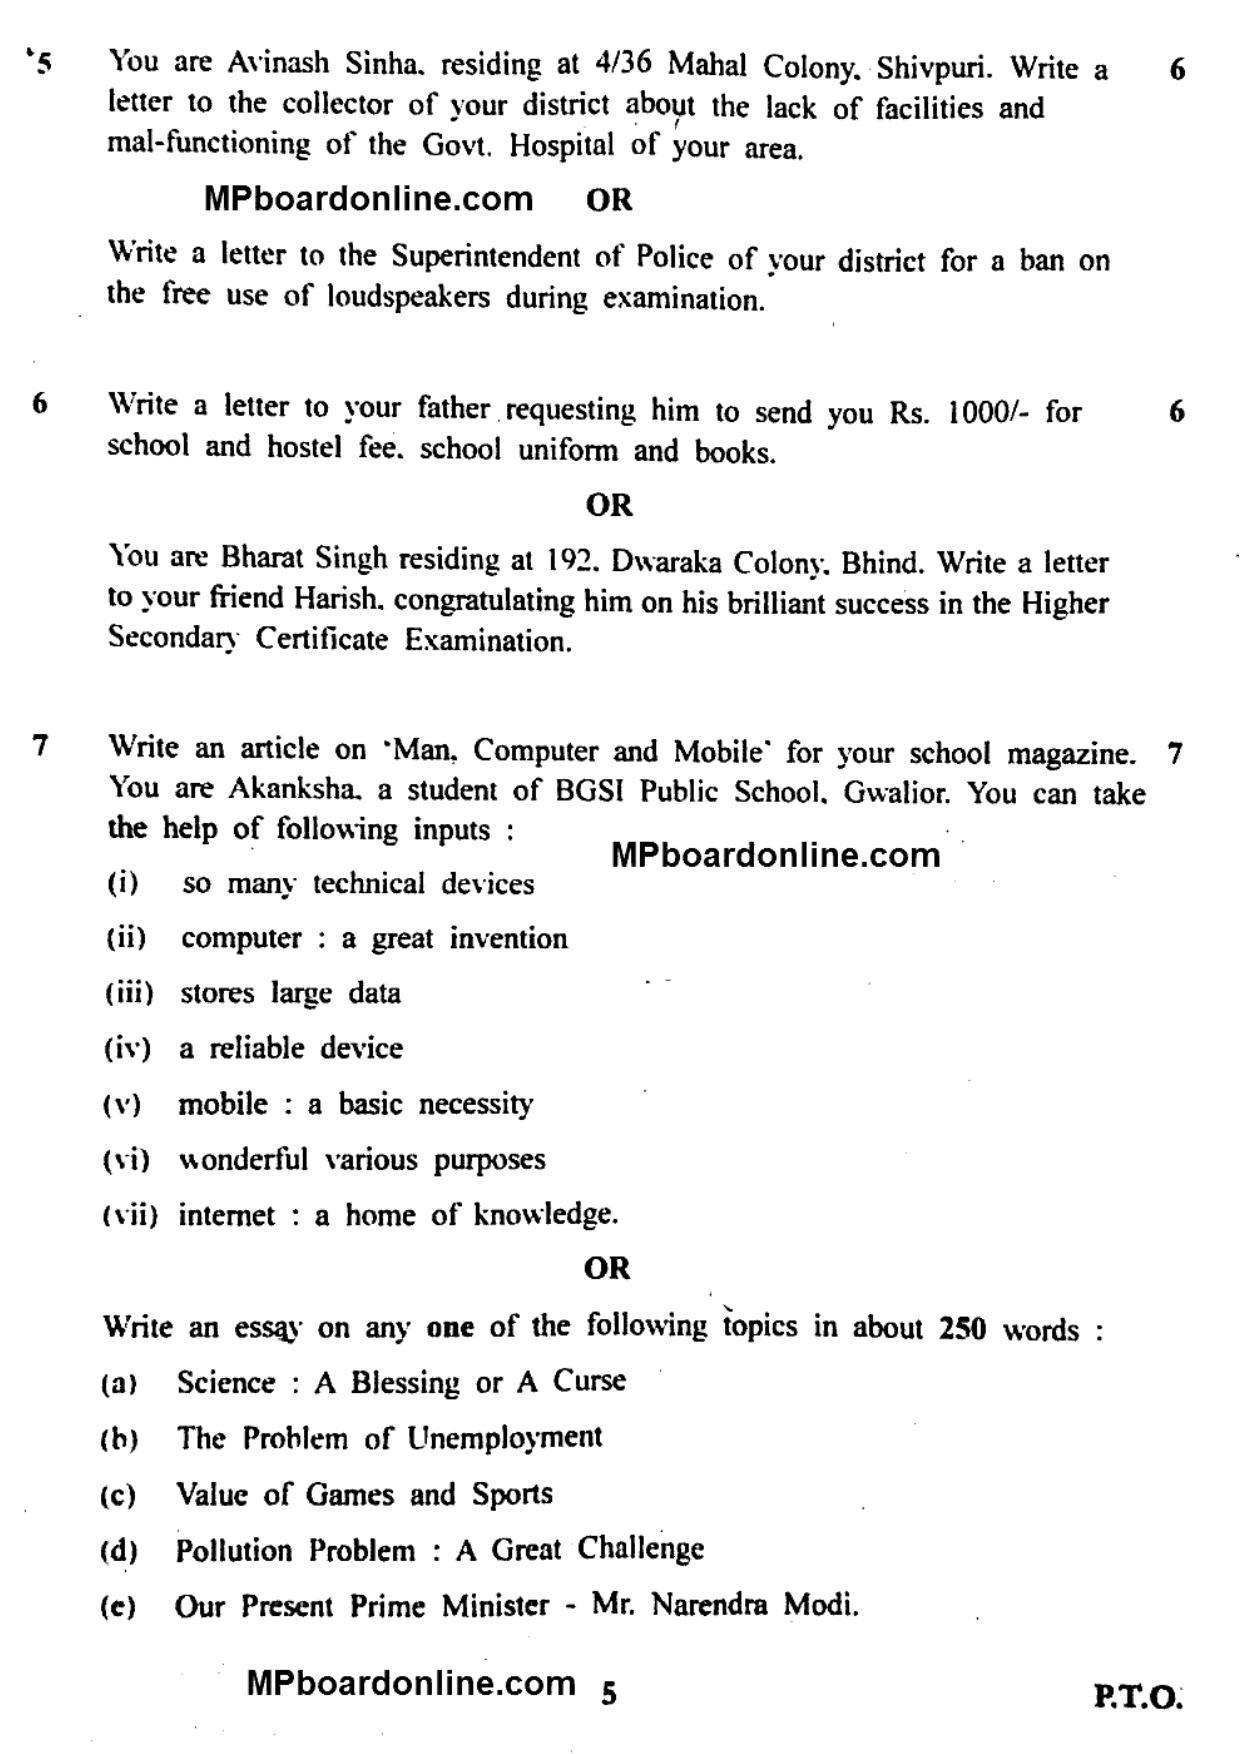 MP Board Class 12 English General 2018 Question Paper - Page 5